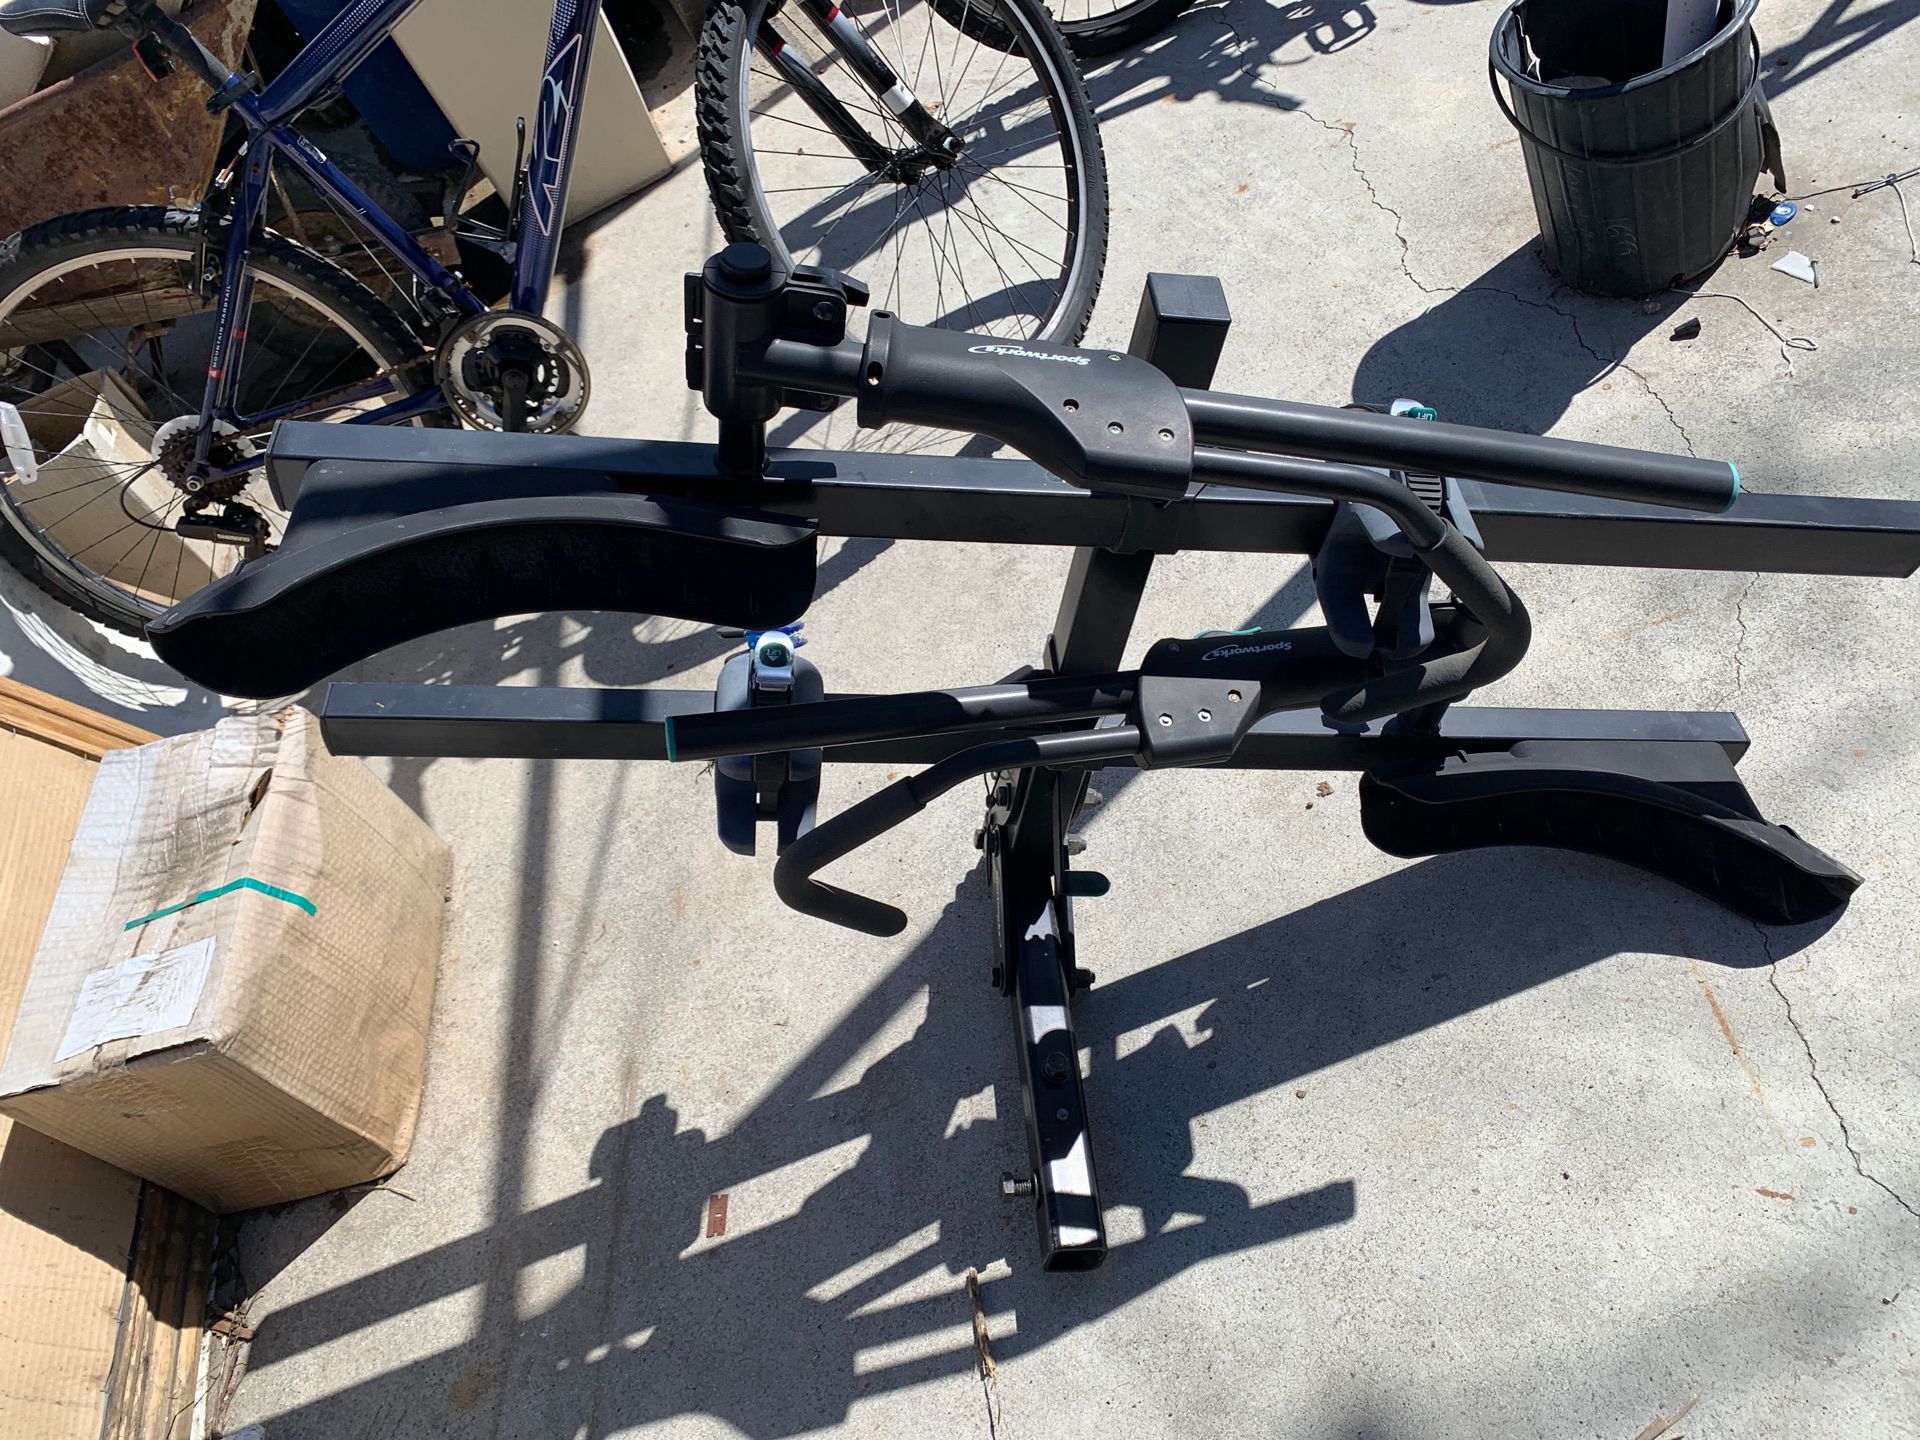 Sportworks Bike Rack for two (Heavy Duty) for Sale in Los Angeles, CA